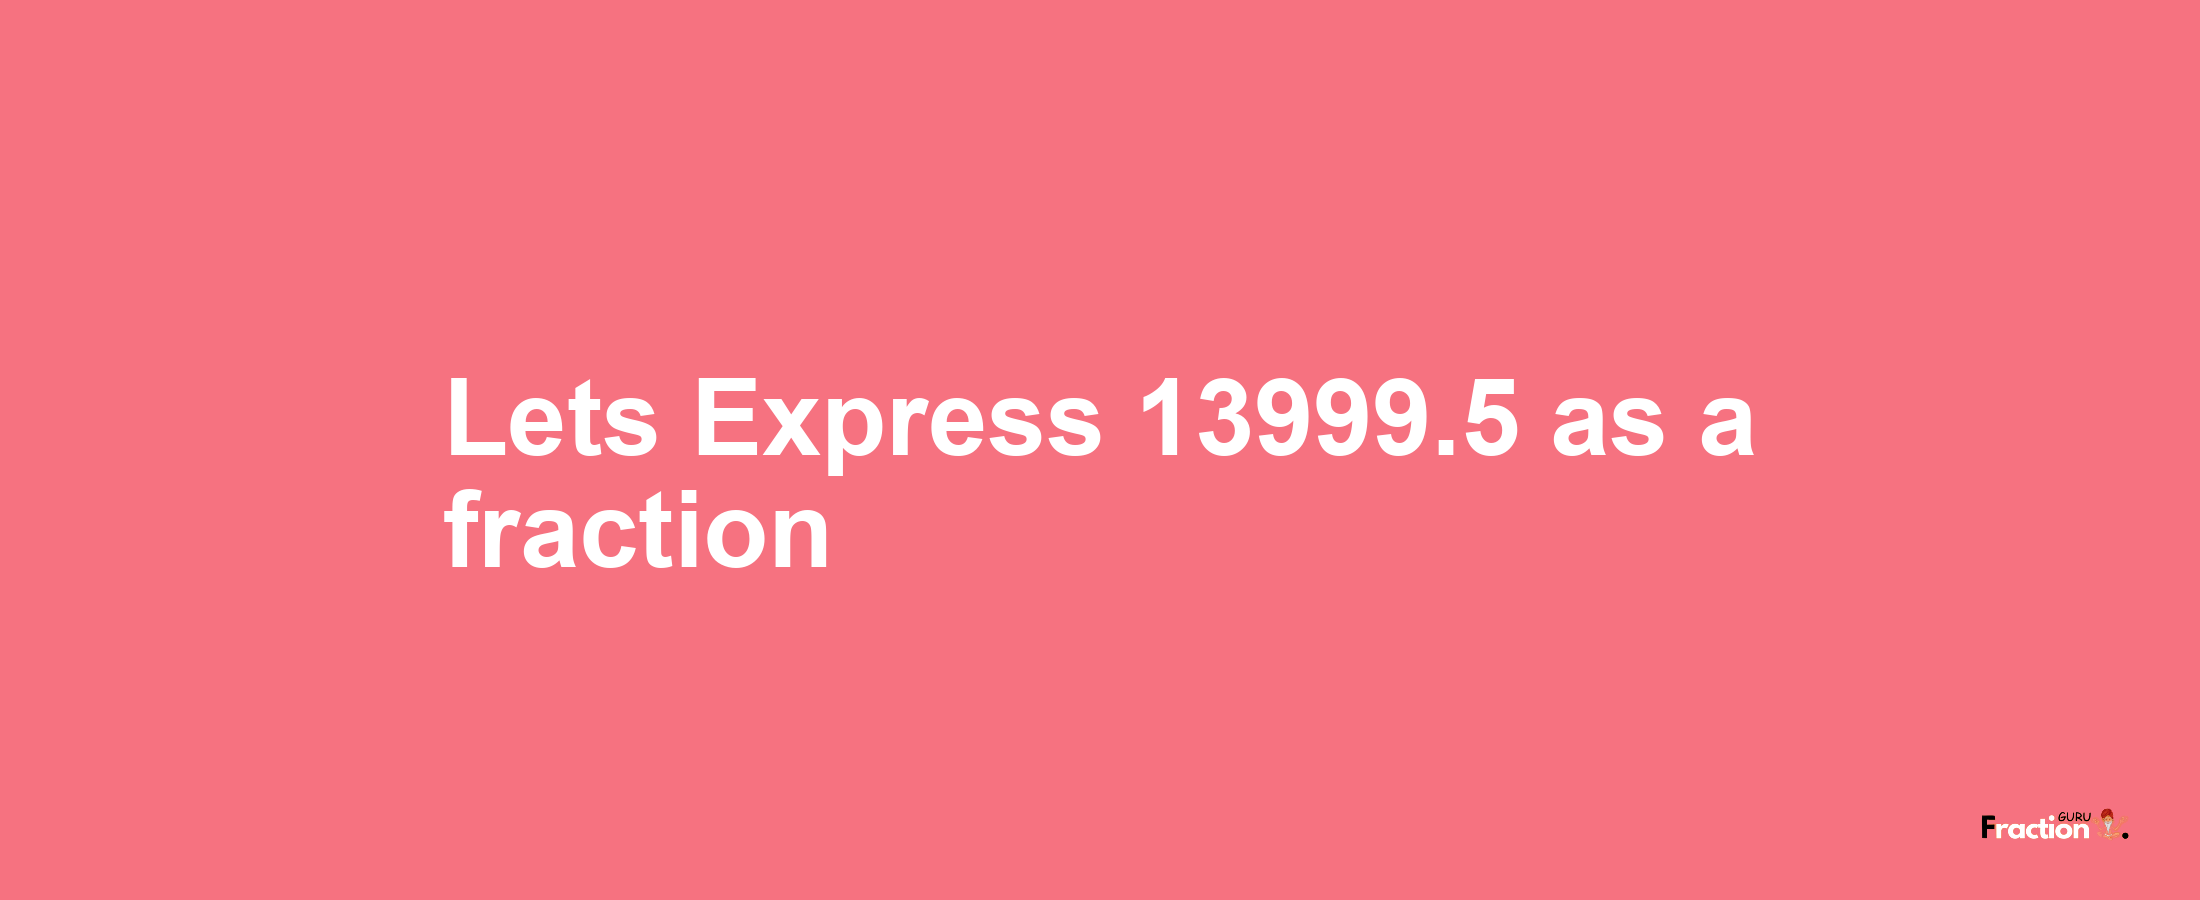 Lets Express 13999.5 as afraction